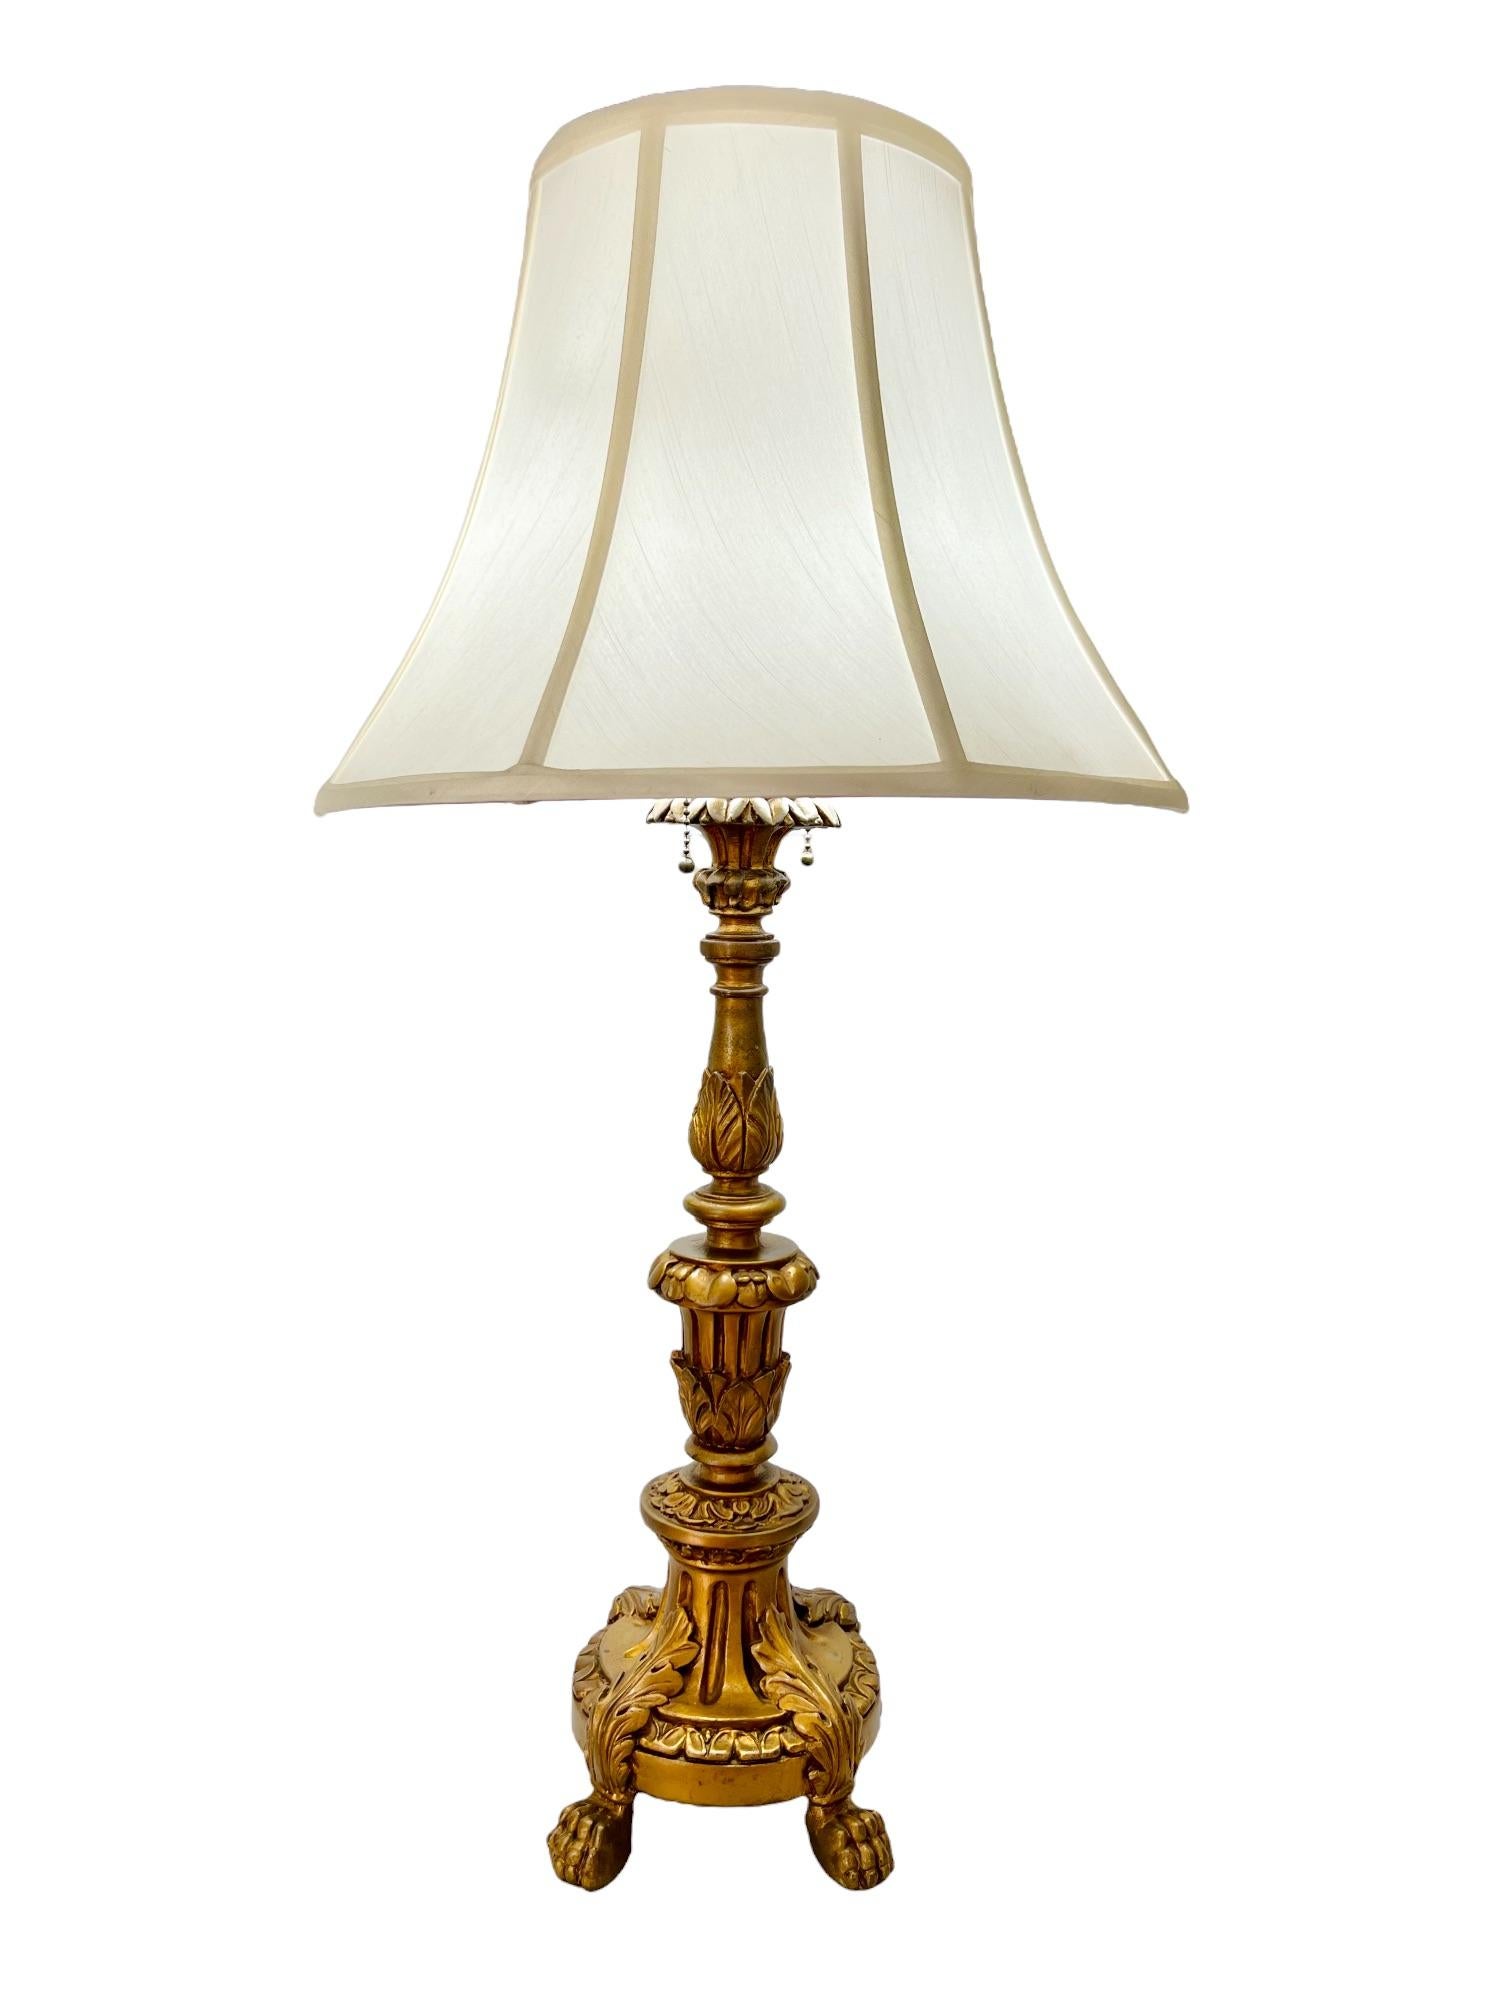 Early 20th Century French Empire Gilt Gesso Lamp In Good Condition For Sale In Harlingen, TX